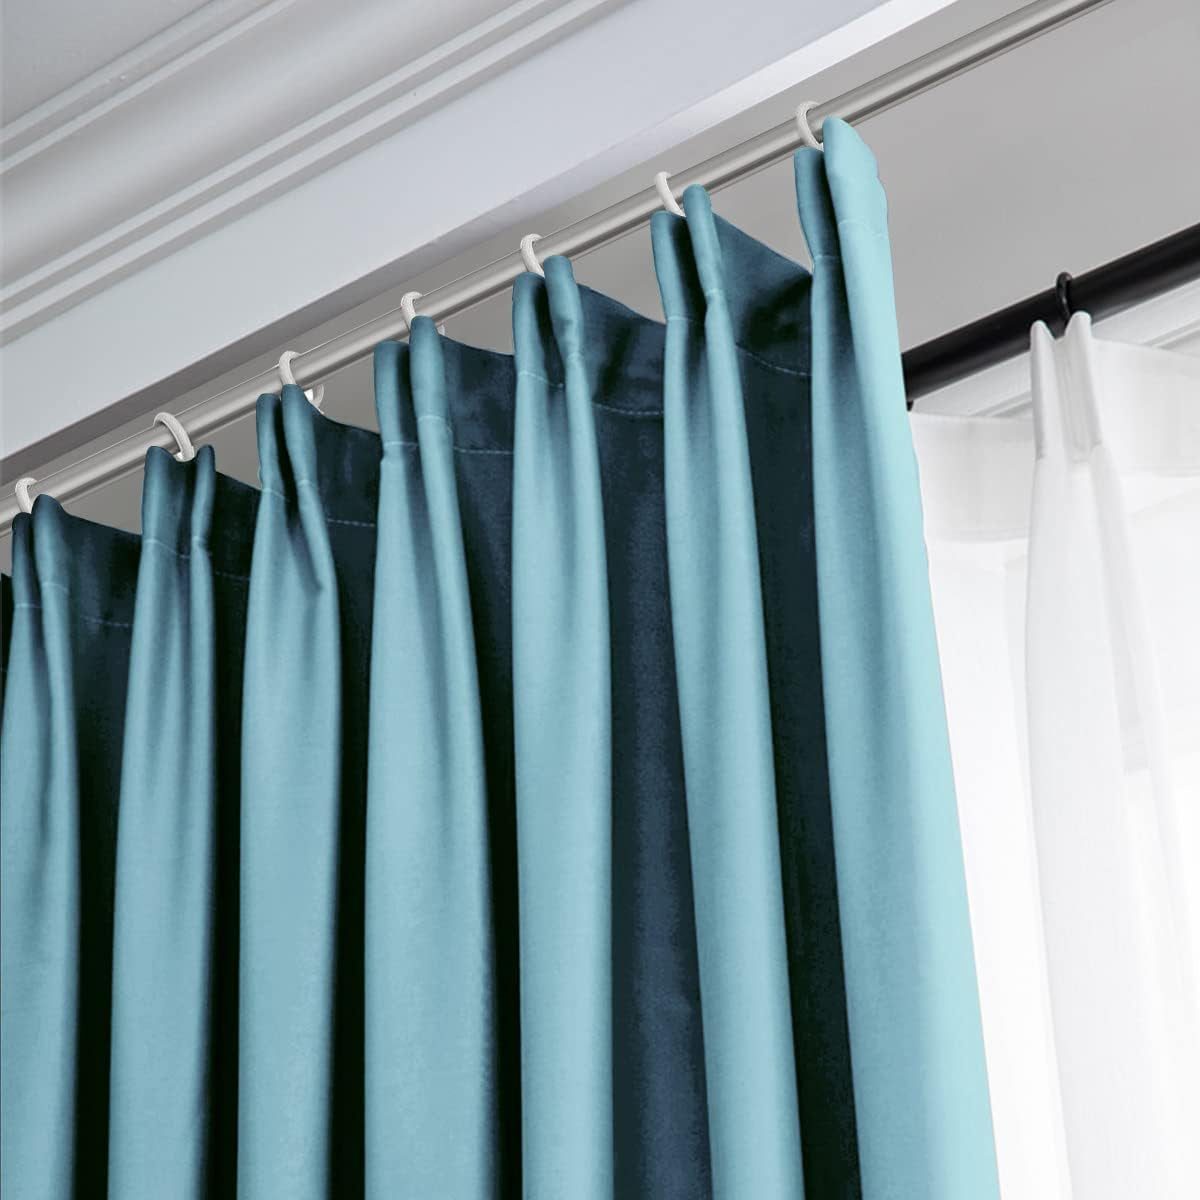 IYUEGO Pinch Pleat Solid Thermal Insulated 95% Sky Blueout Patio Door Curtain Panel Drape for Traverse Rod and Track, Sky Blue 52" W X 84" L (One Panel)  I Love Curtains   